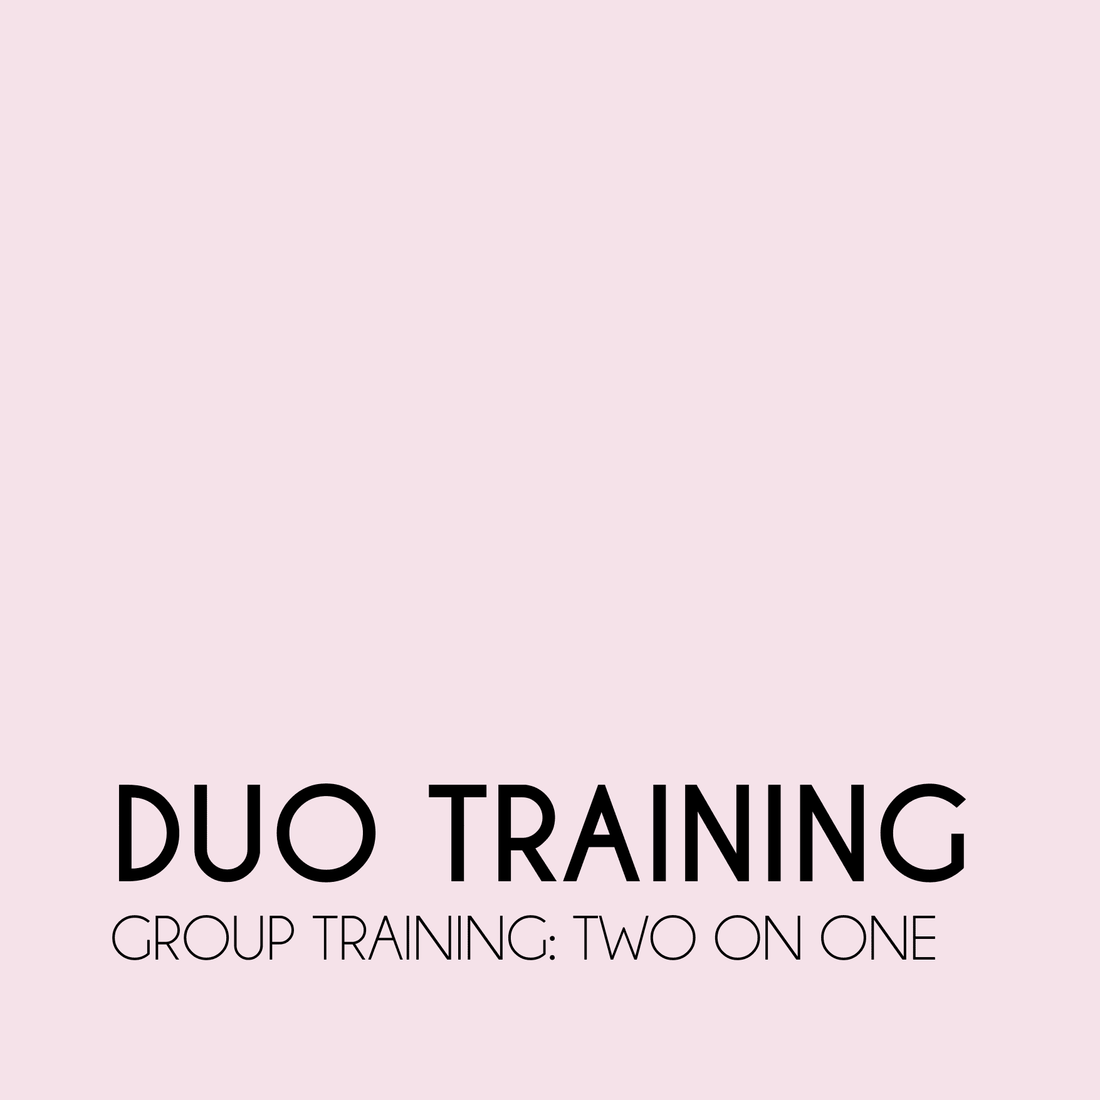 DUO TRAINING (TWO ON ONE)